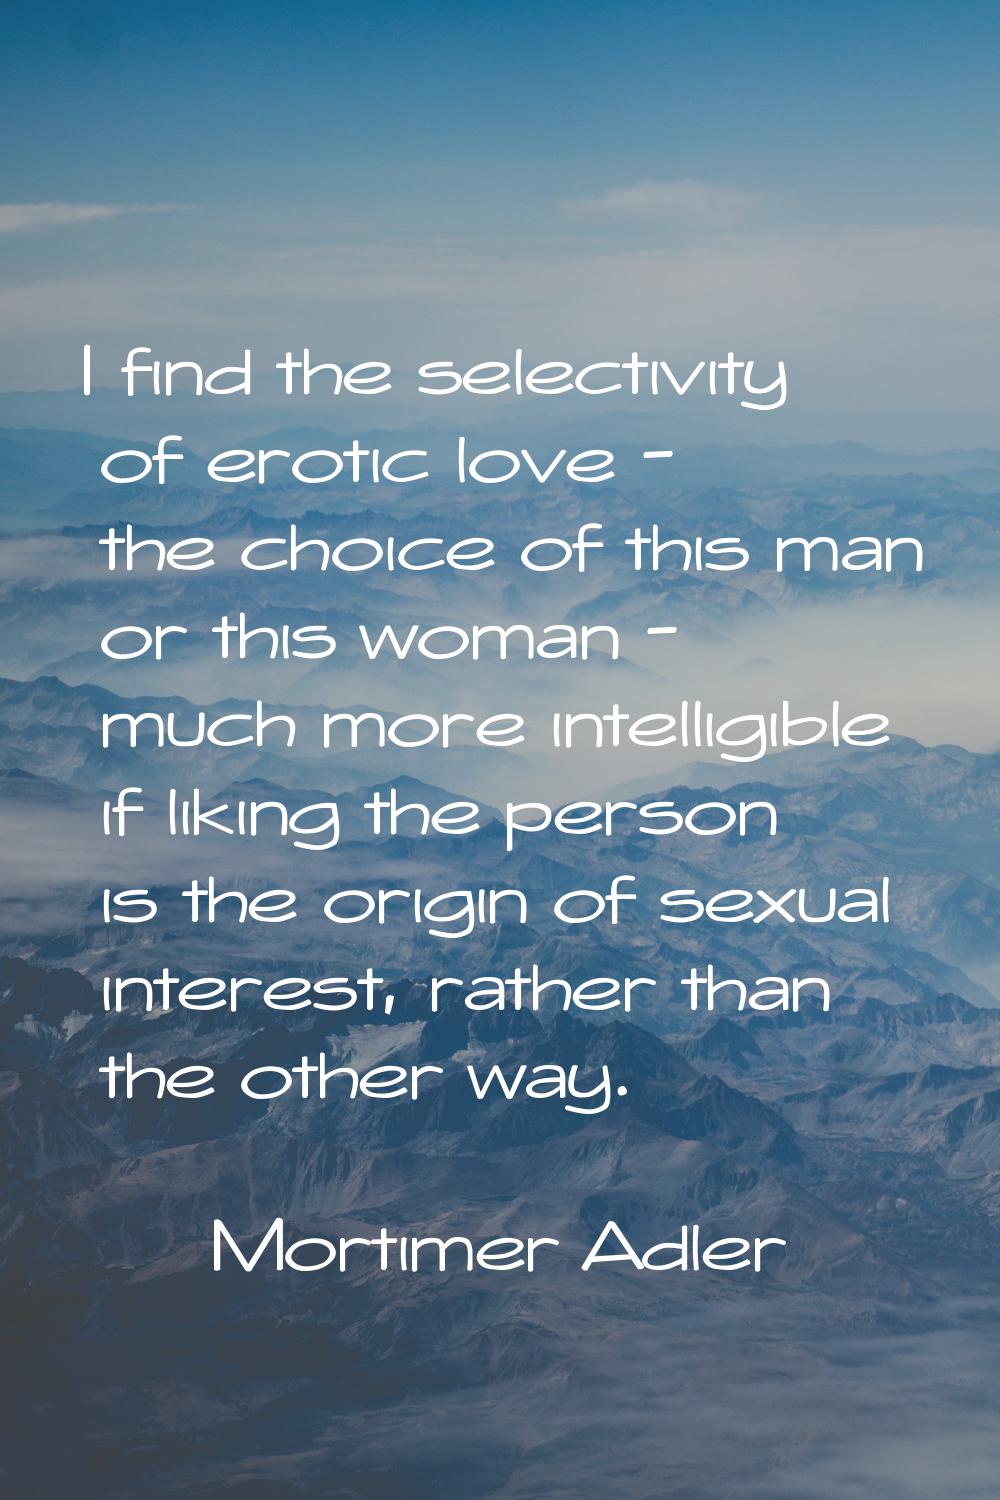 I find the selectivity of erotic love - the choice of this man or this woman - much more intelligib